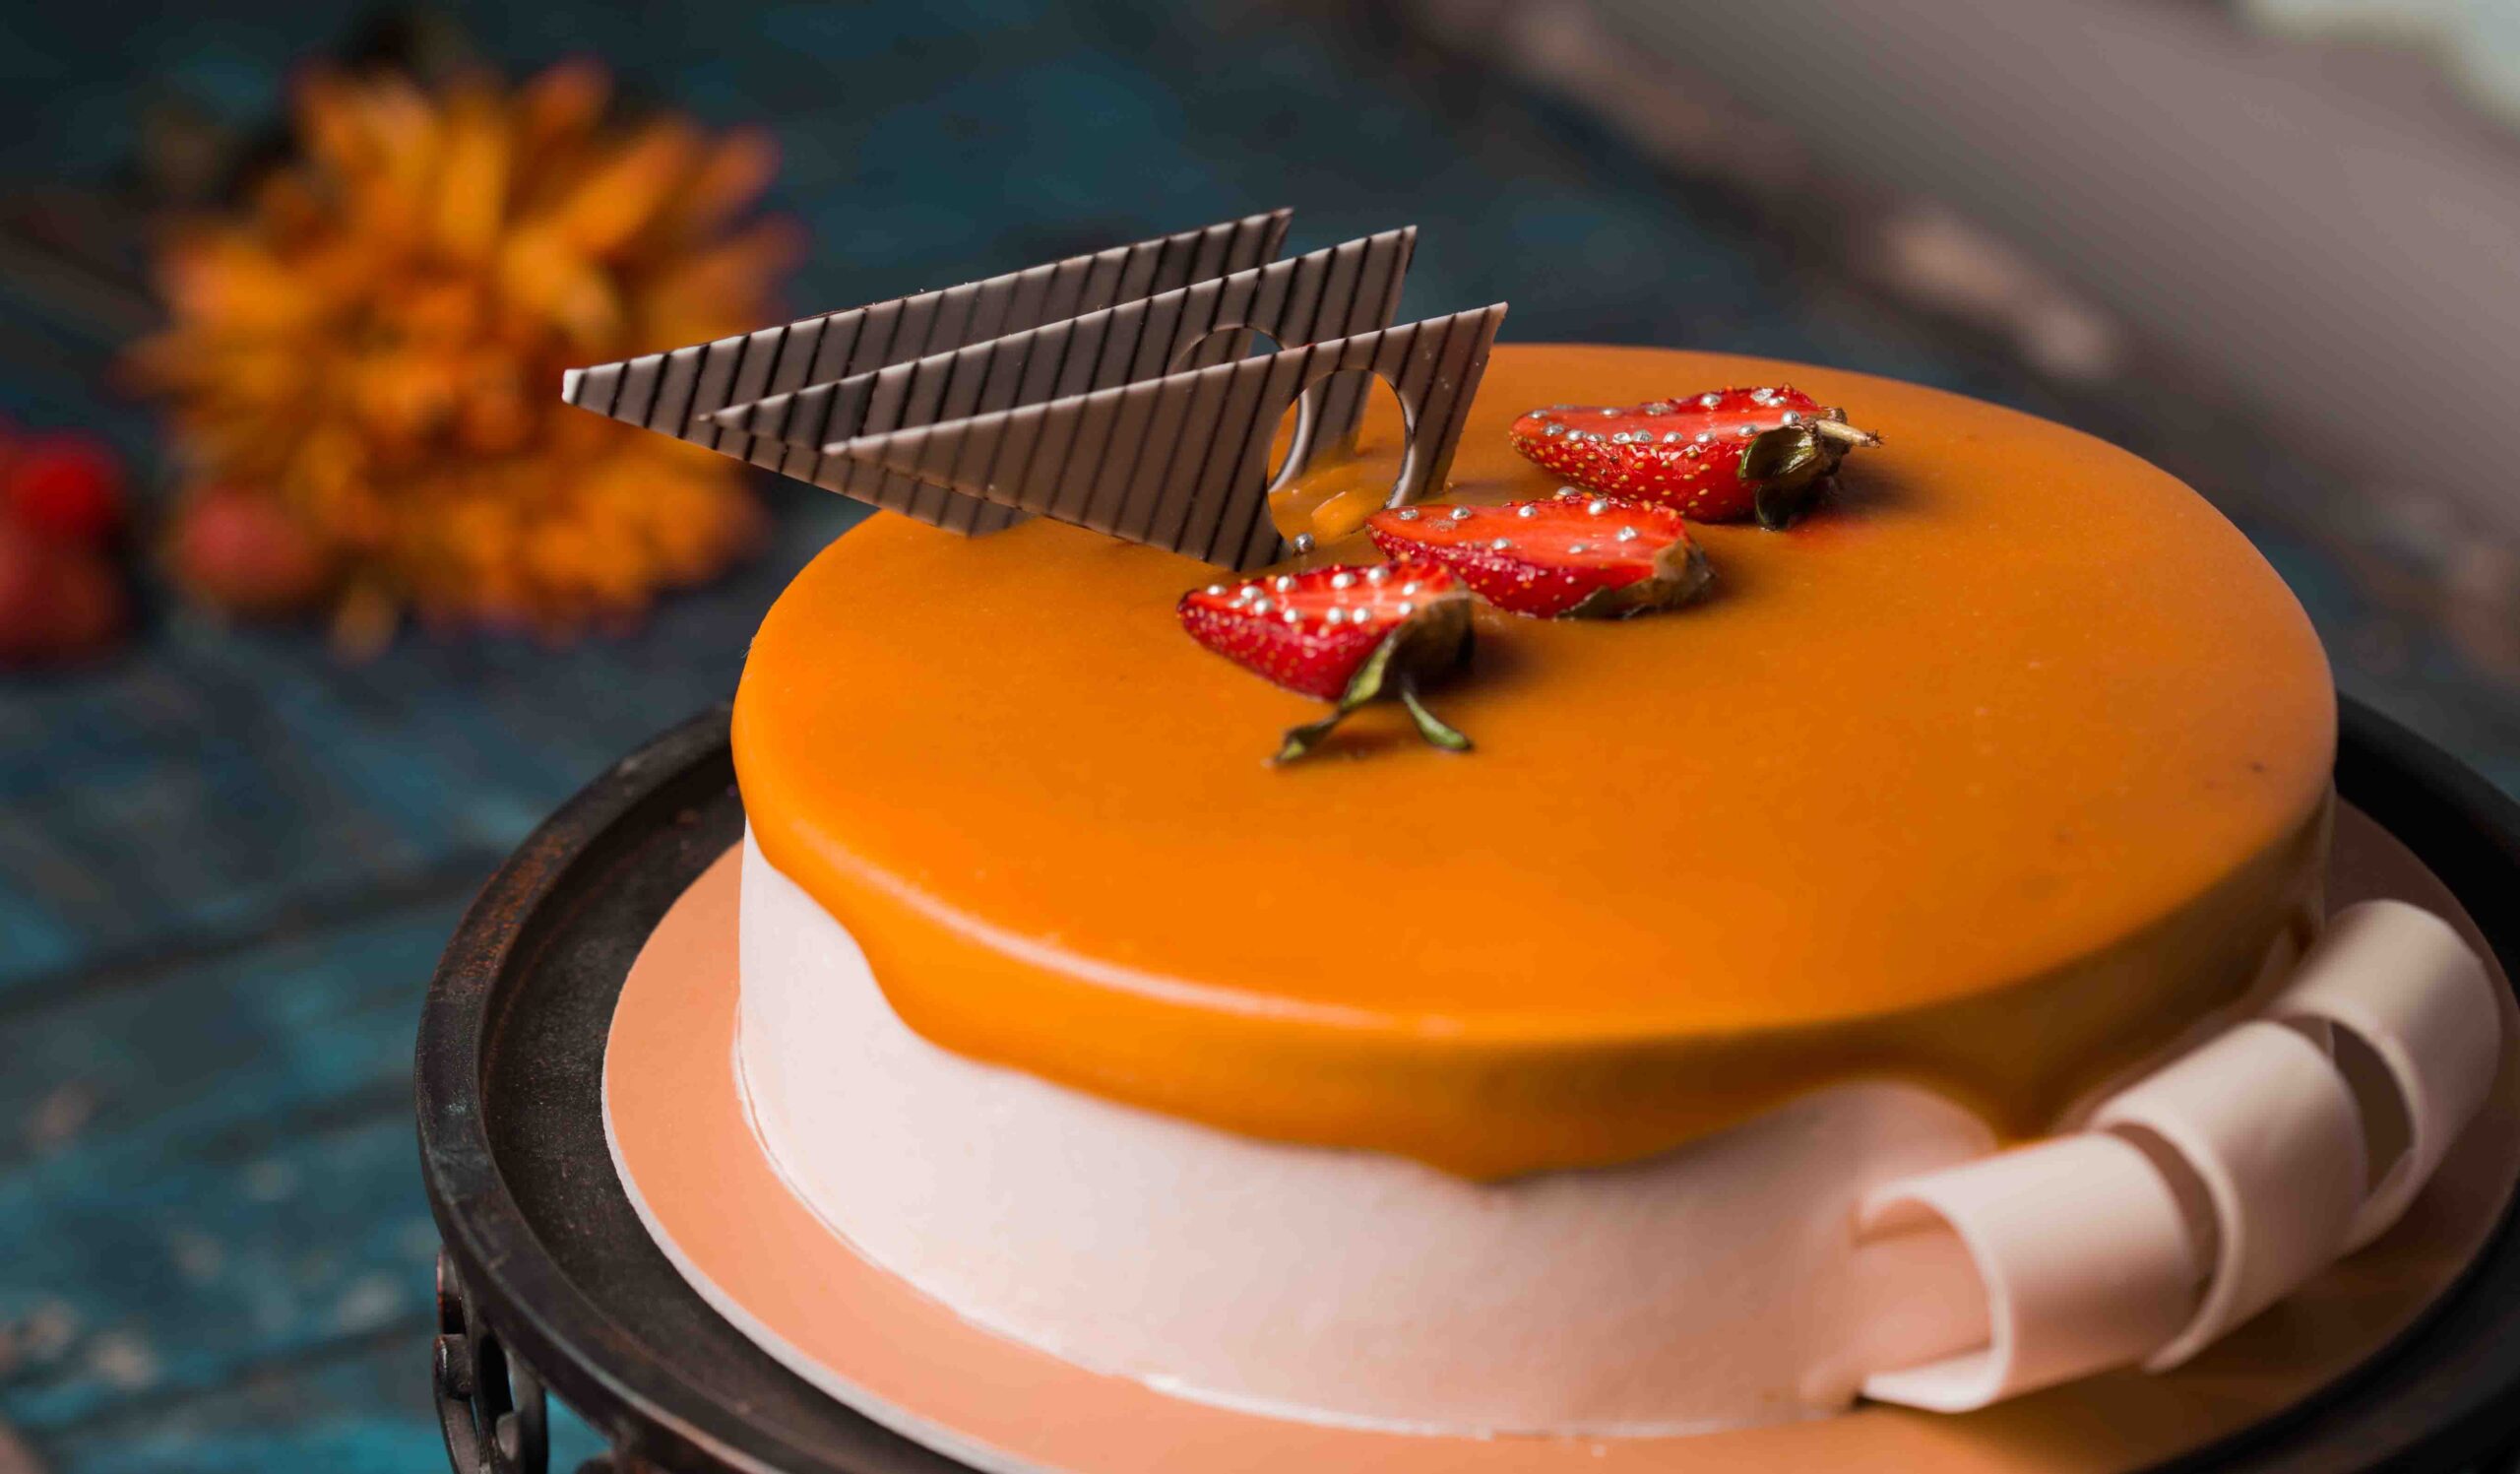 Order cakes online for same-day delivery to your home in Delhi